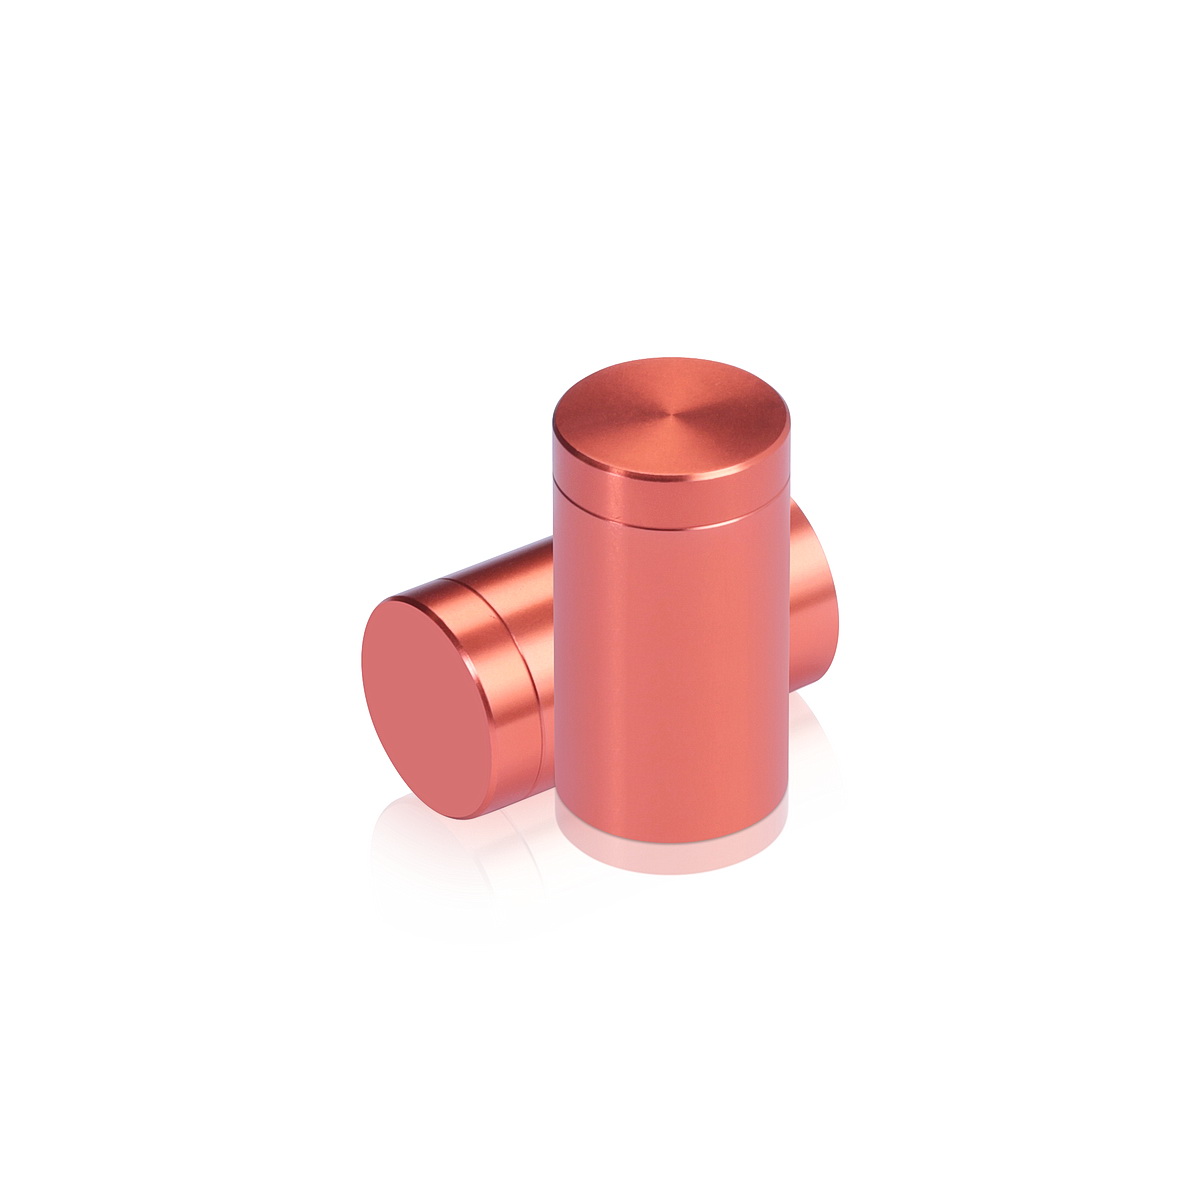 5/8'' Diameter X 1'' Barrel Length, Affordable Aluminum Standoffs, Copper Anodized Finish Easy Fasten Standoff (For Inside / Outside use) [Required Material Hole Size: 7/16'']